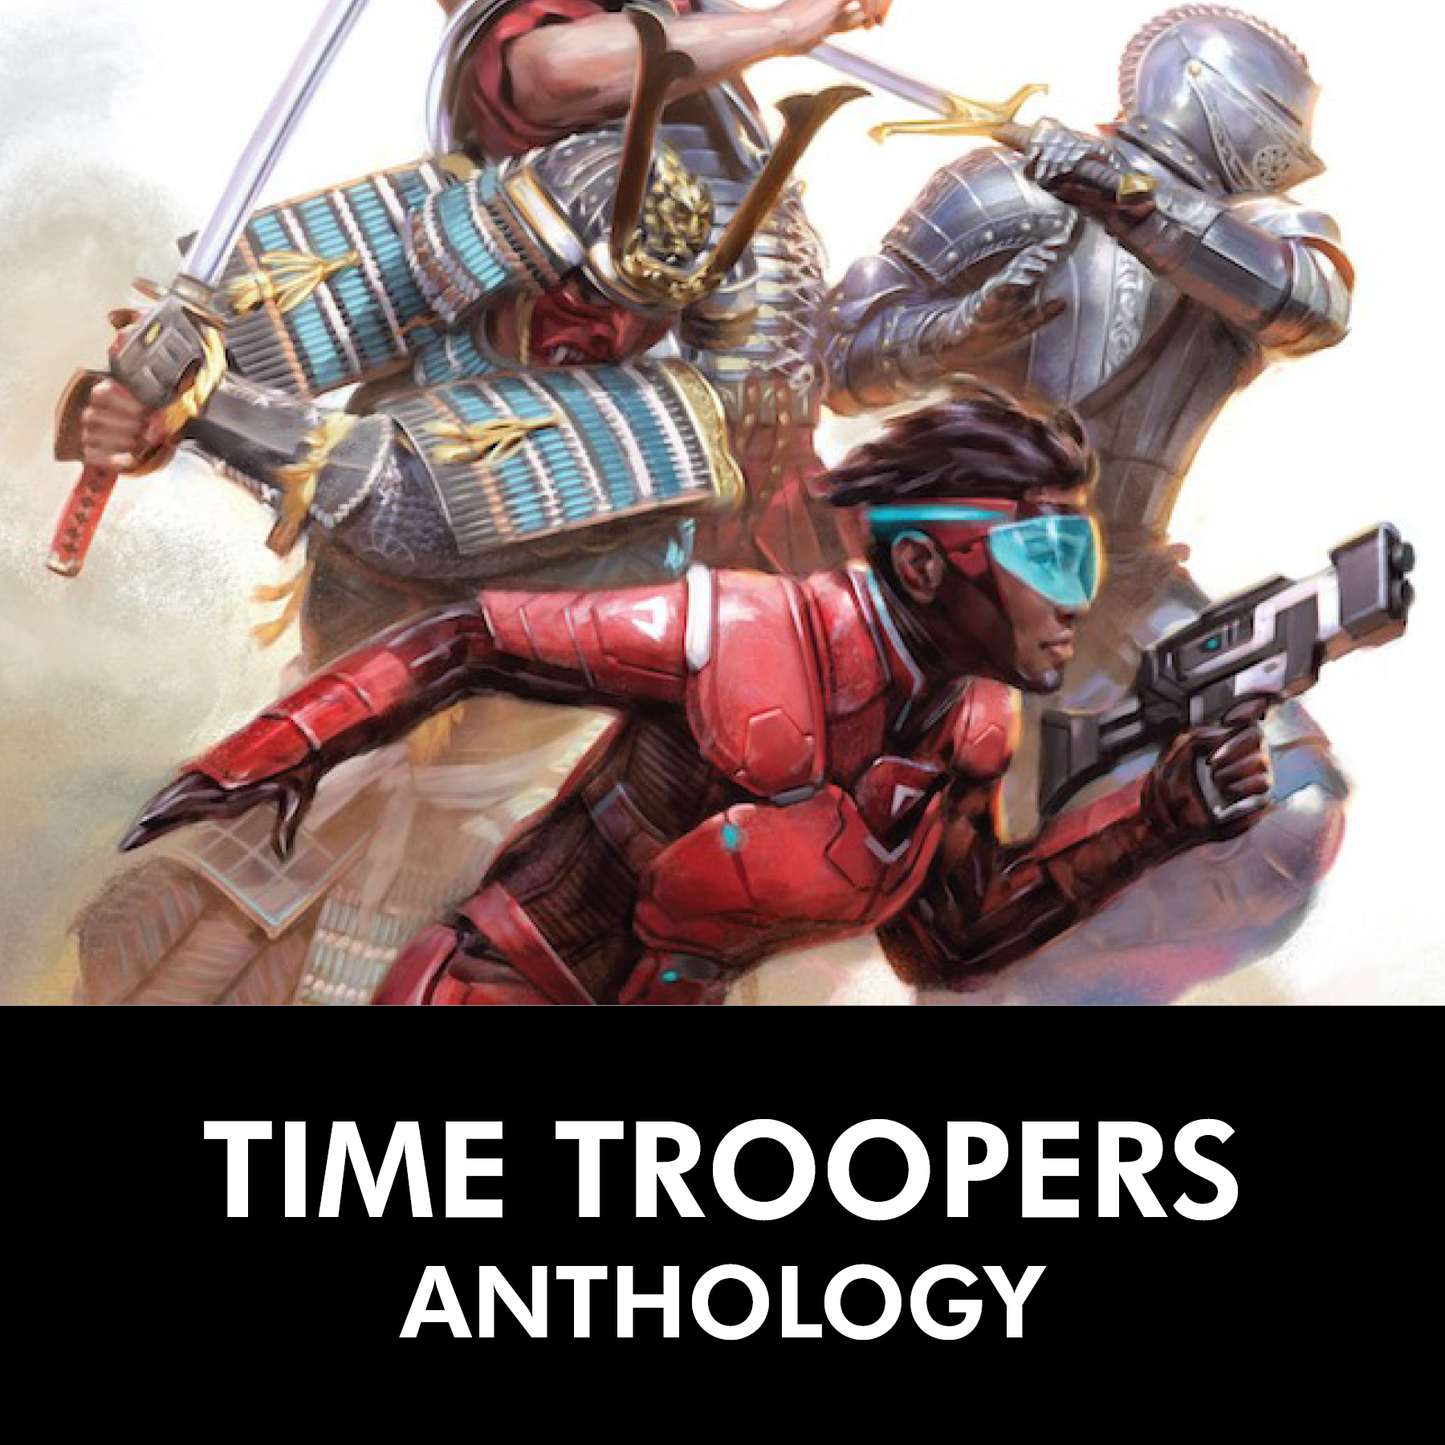 PRINT: Time Troopers (SIGNED Trade Paperback)